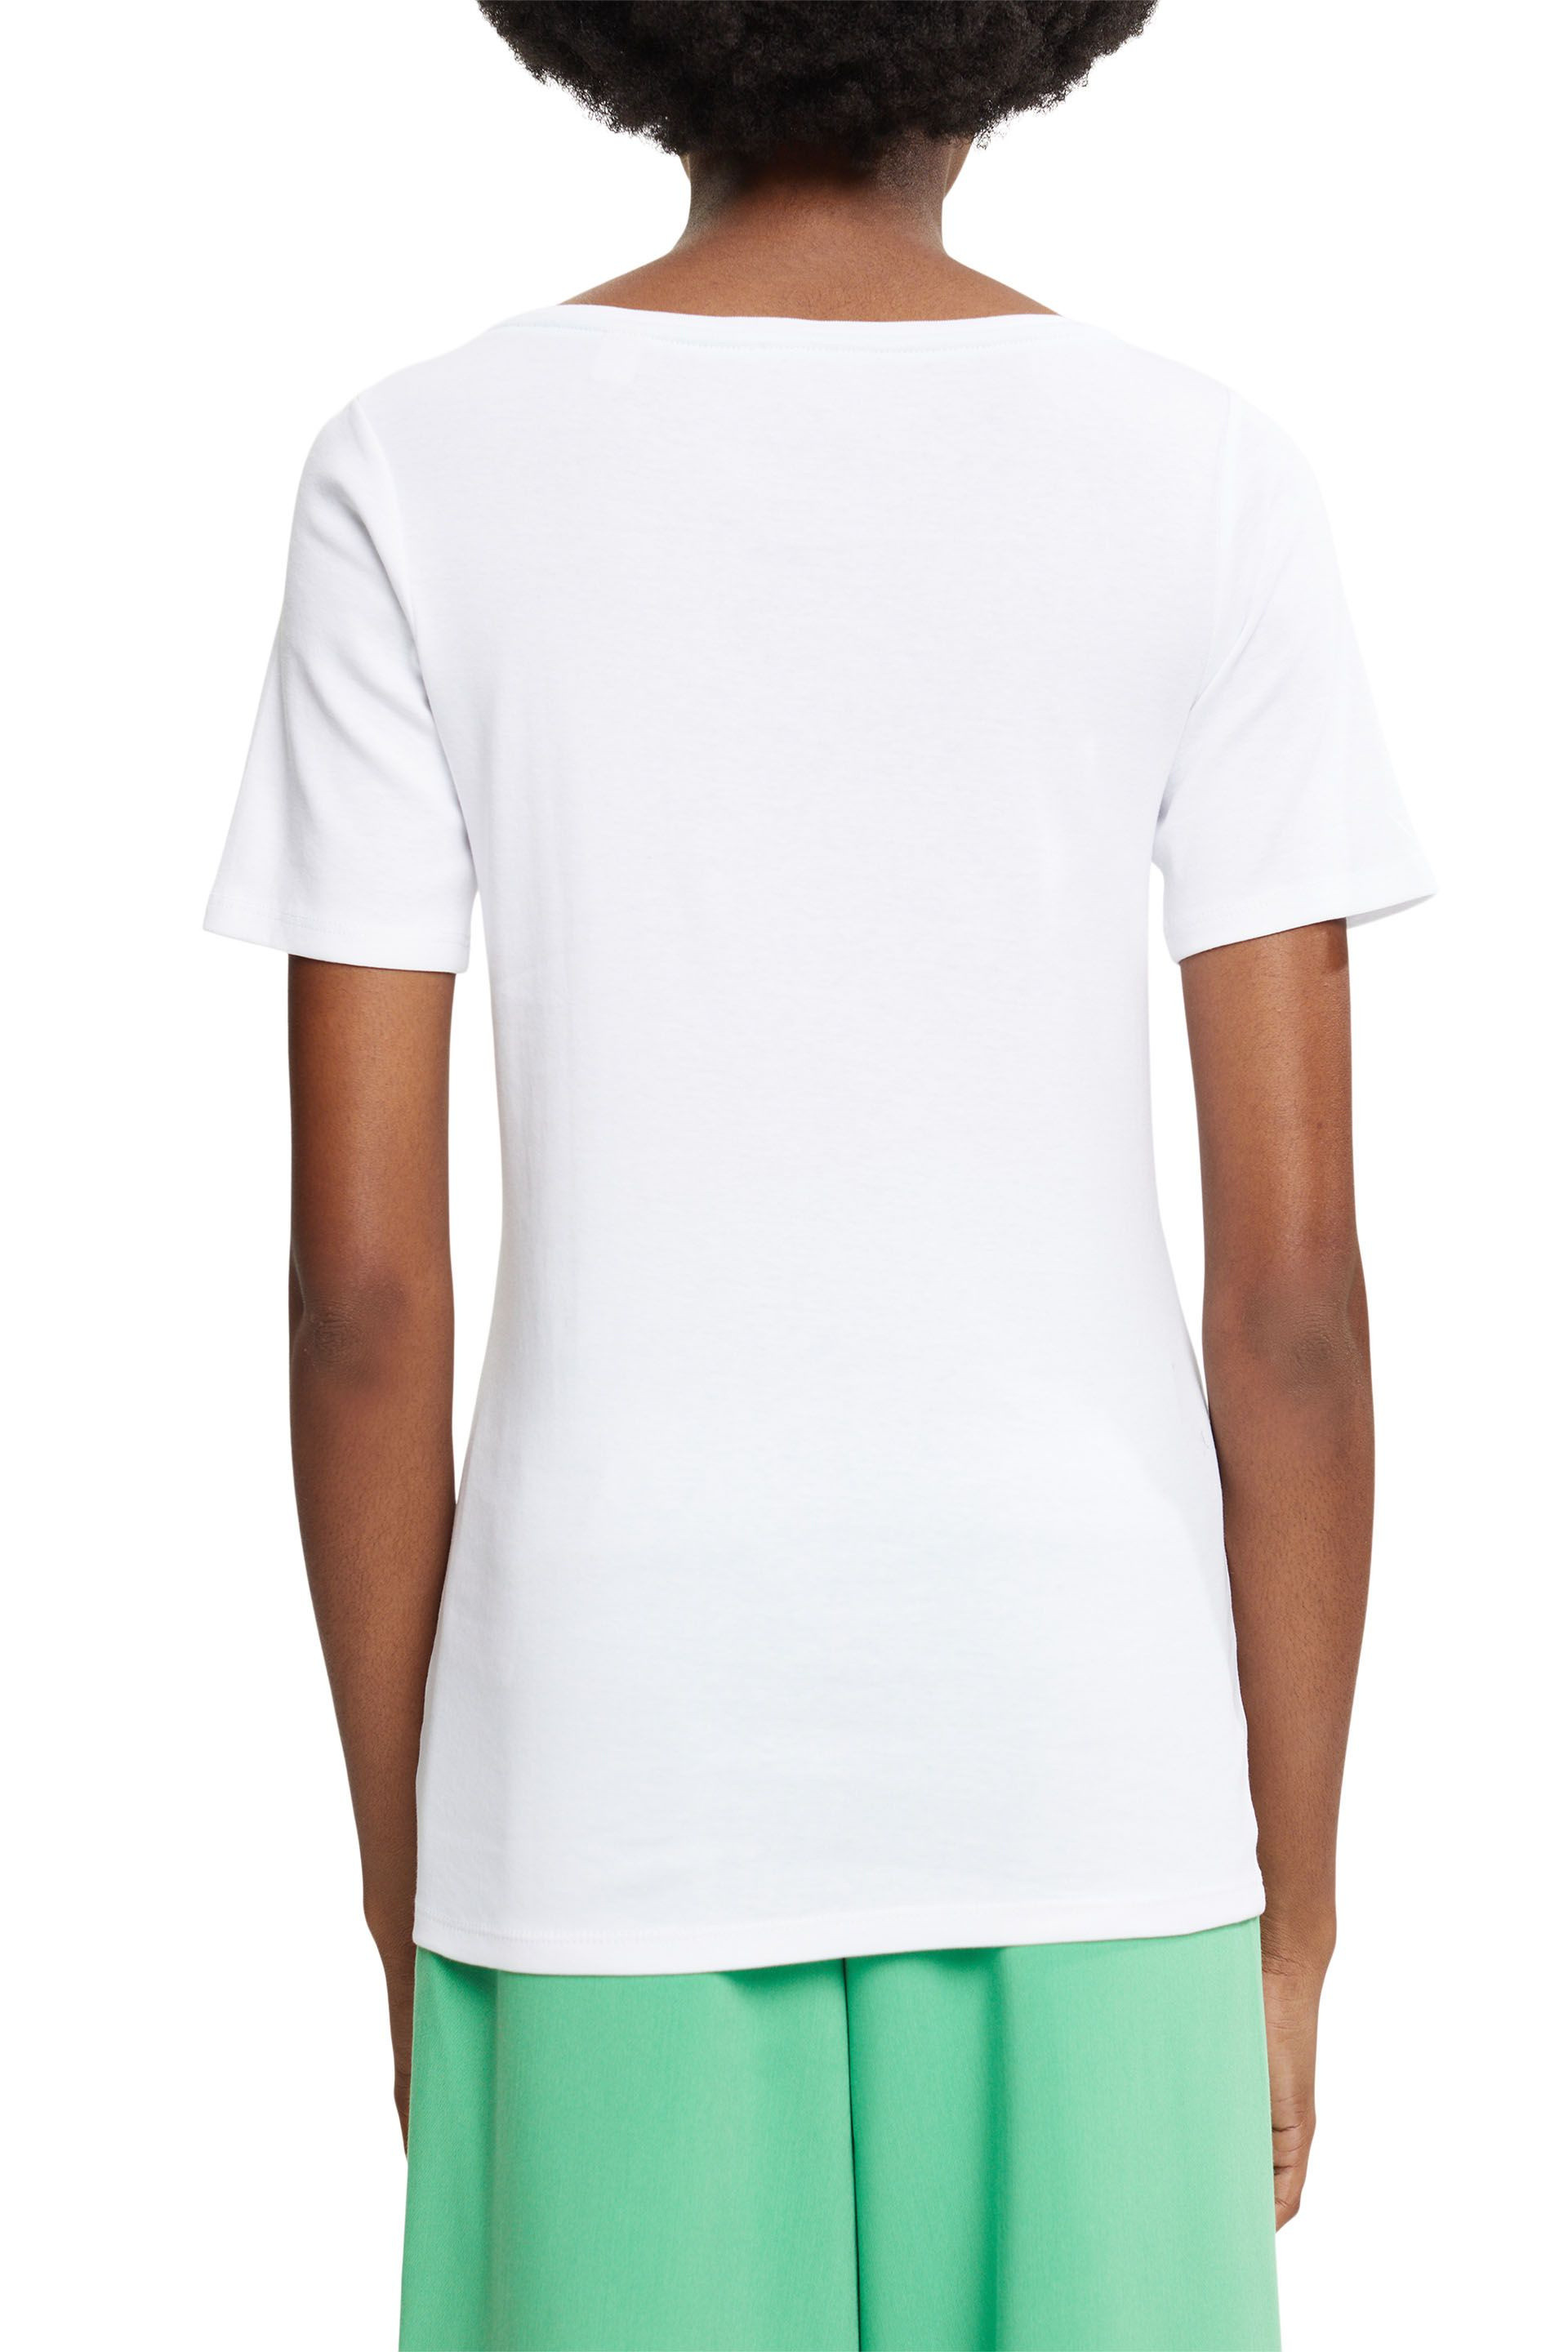 Esprit - T-shirt con logo in cotone, Bianco, large image number 2